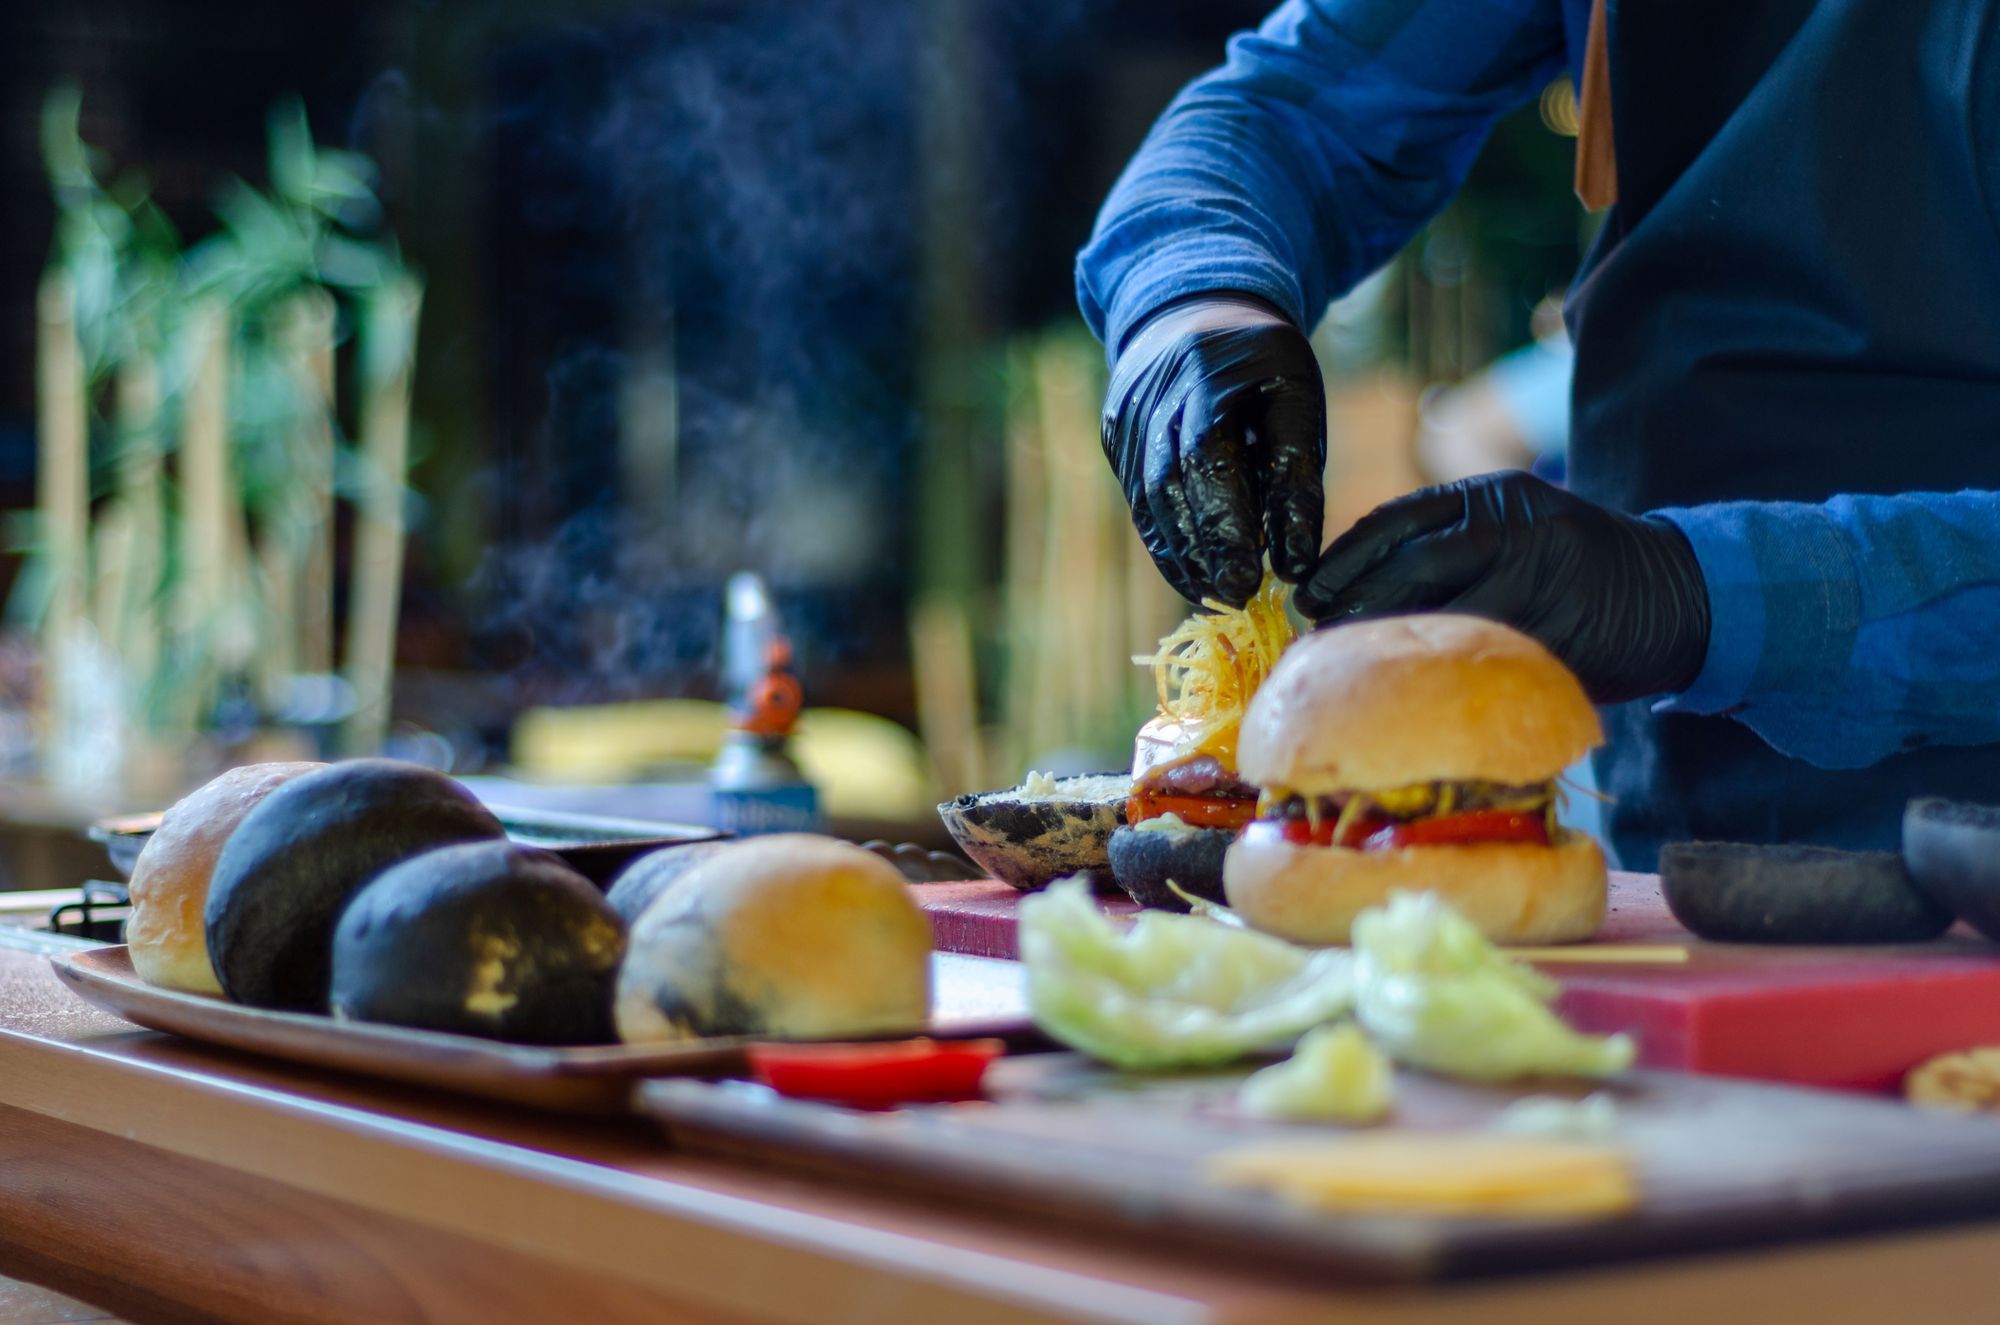 A cook prepares a plate of burgers at a pop-up restaurant